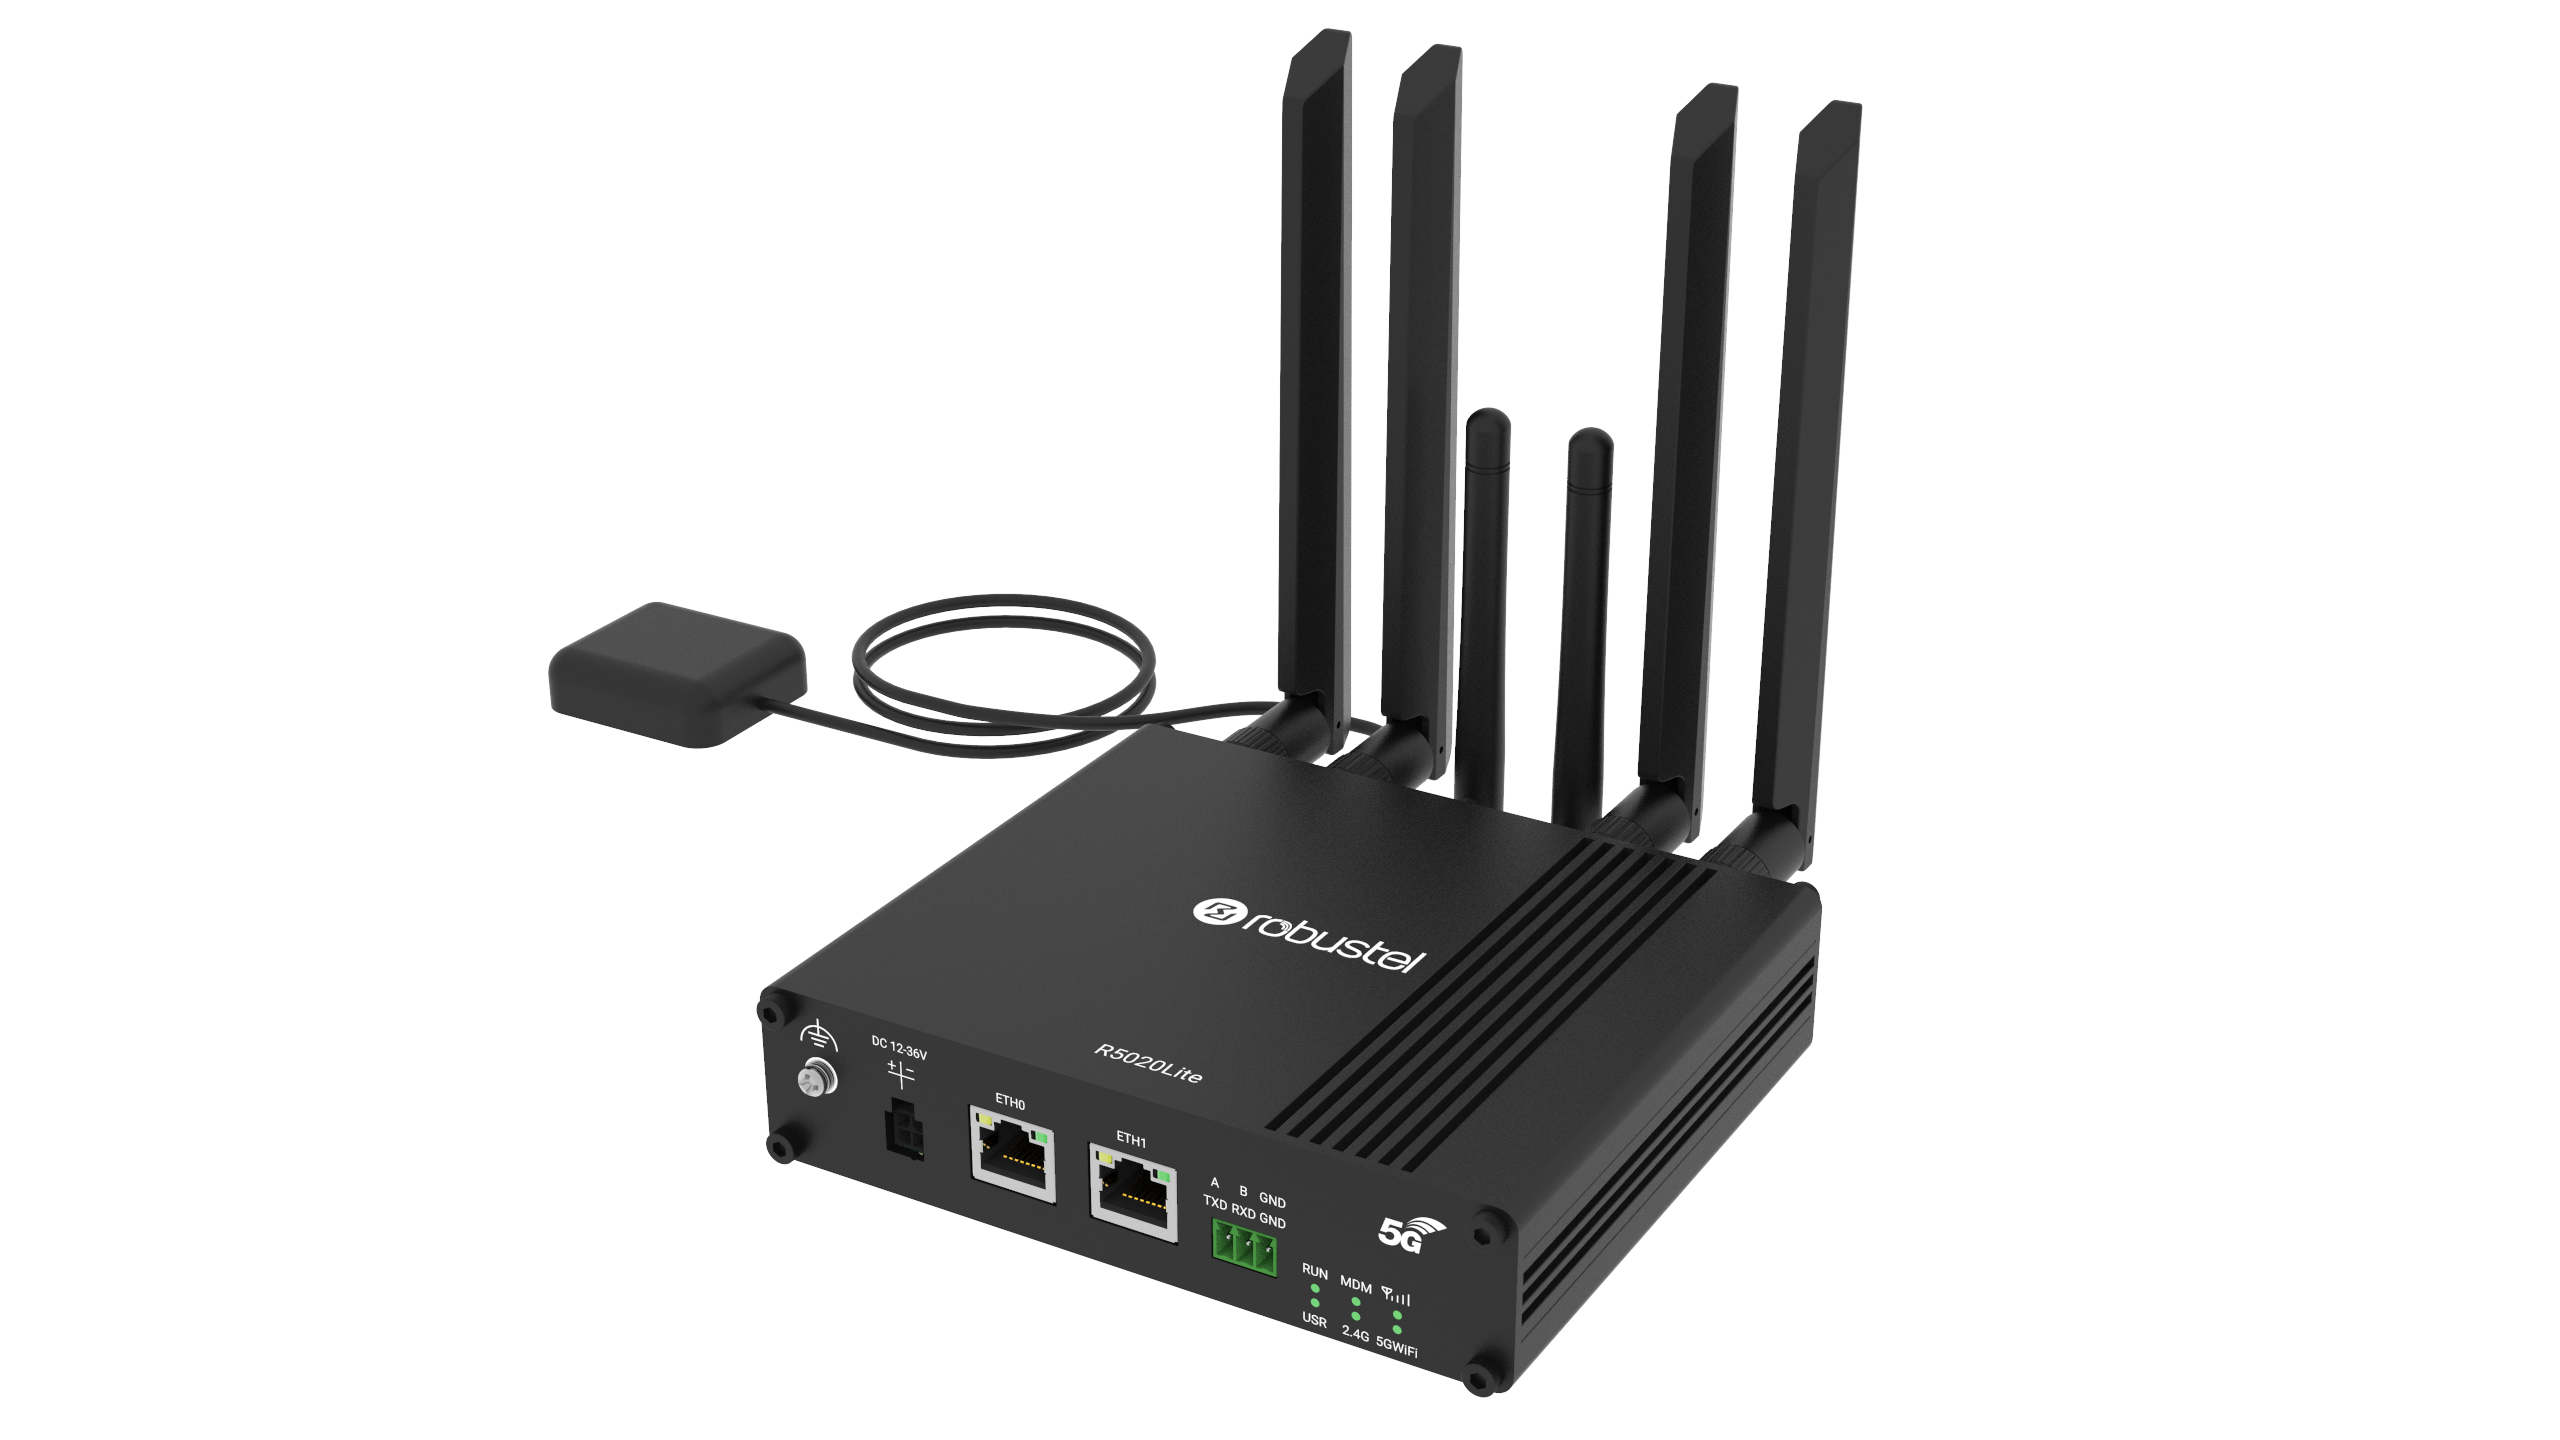 Introducing the Robustel R5020 - 5G Industrial IoT Router - Robustel